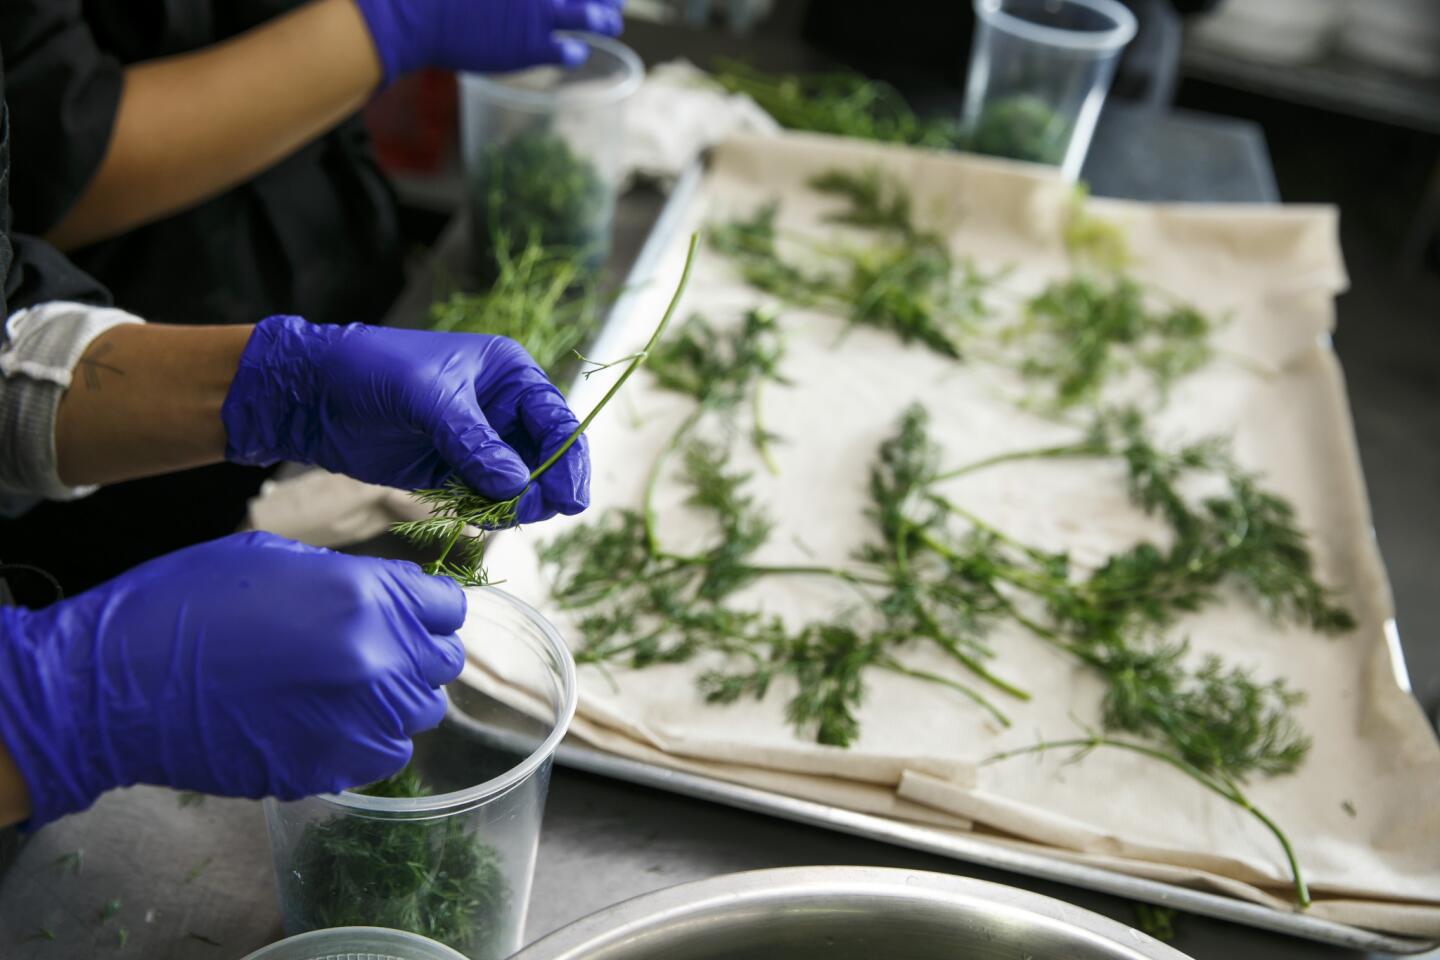 Workers at Salt & Straw's ice cream factory ready dill for use.